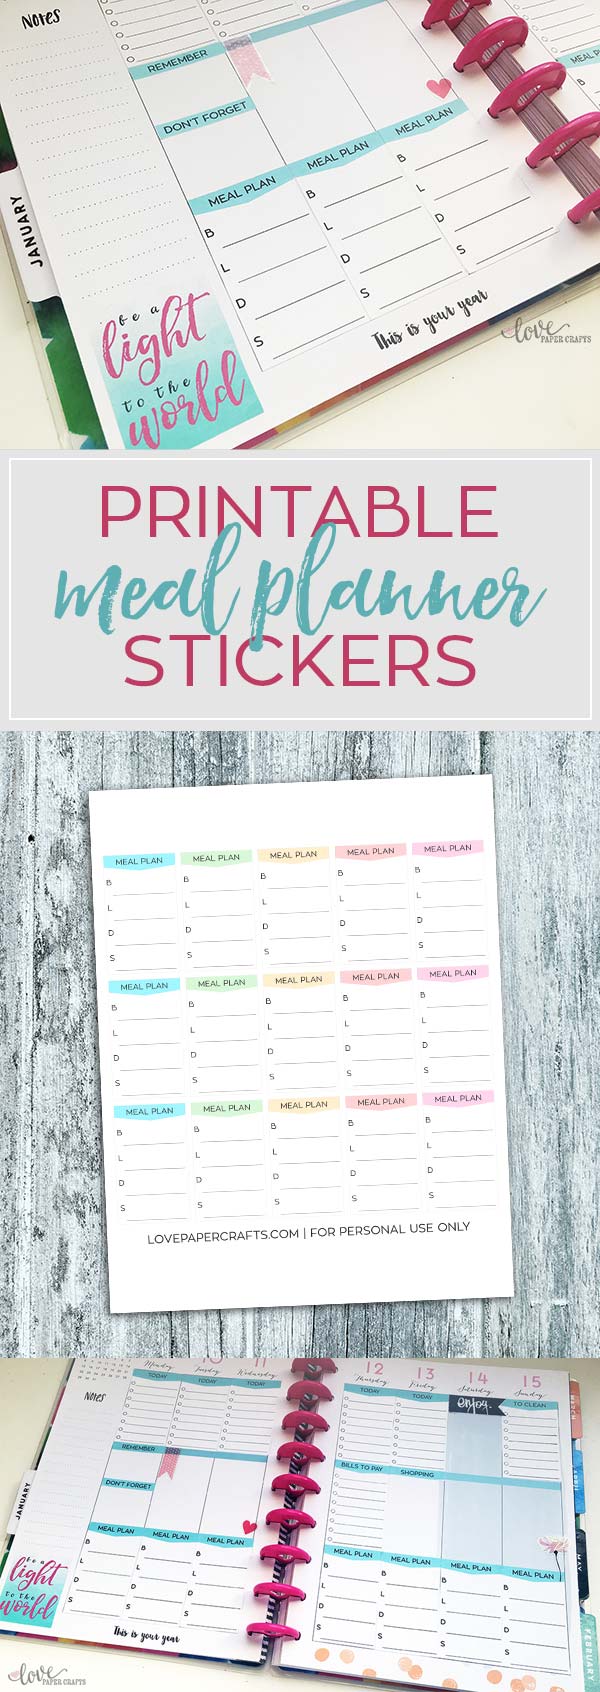 Free Printable Meal Planning Planner Stickers #planner #plannerstickers #planneraddict #mealplanner | LovePaperCrafts.com